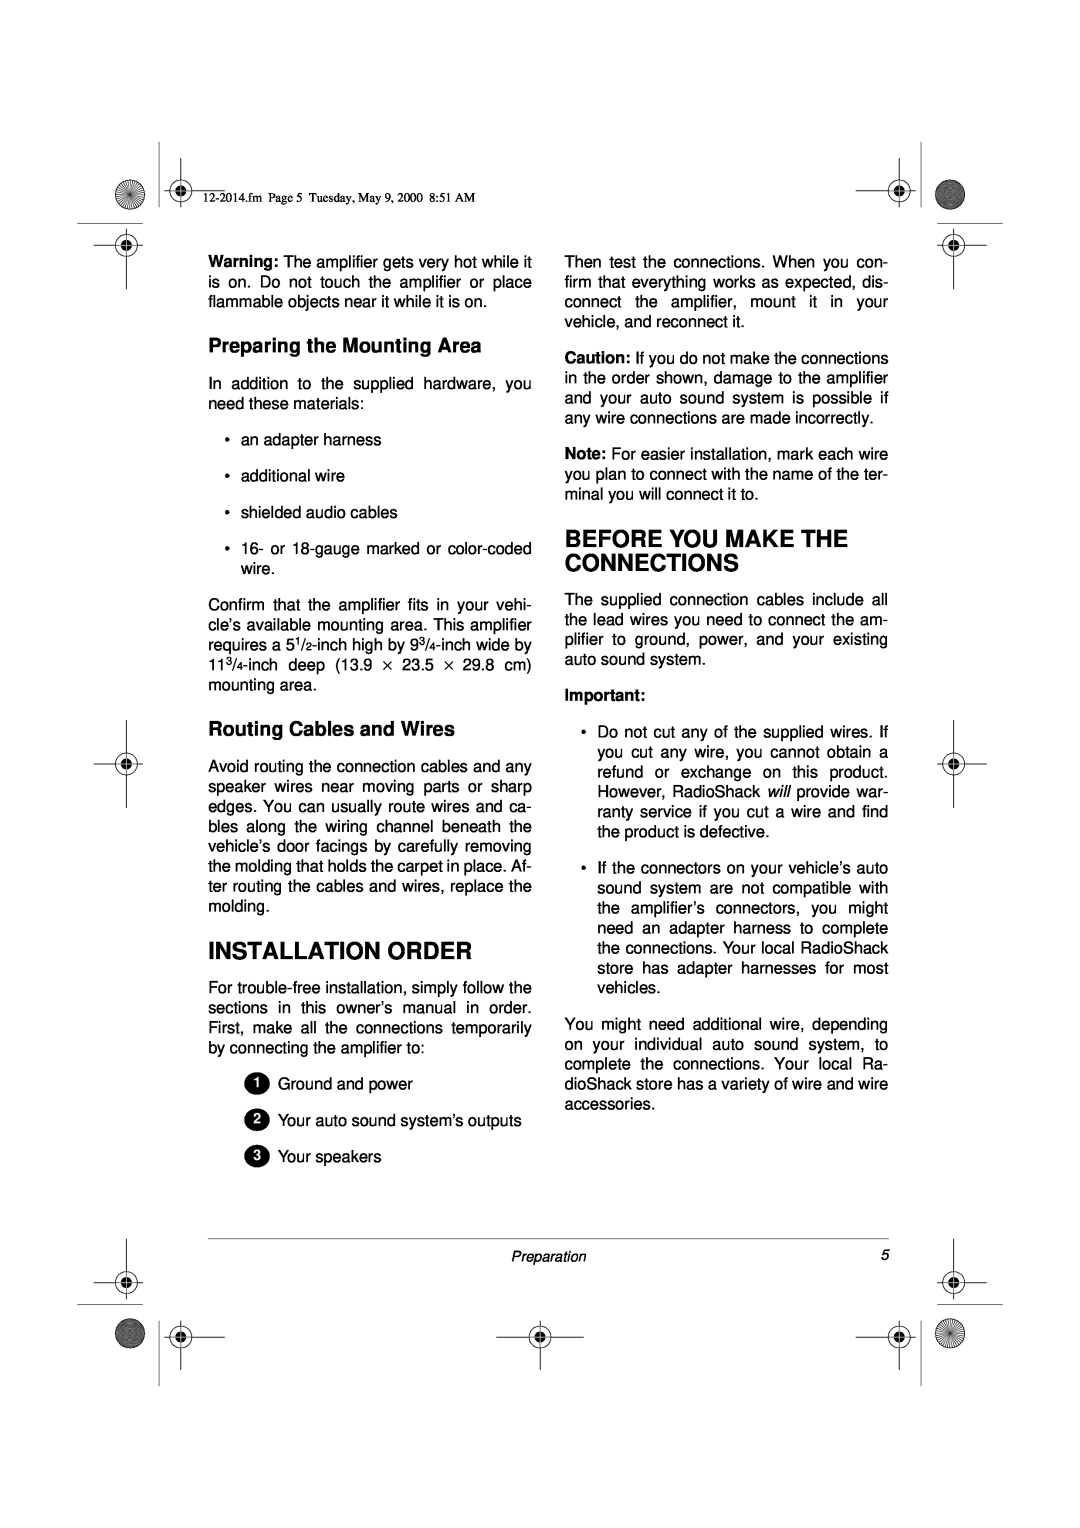 Radio Shack XL-110 owner manual Installation Order, Before You Make The Connections, Preparing the Mounting Area 